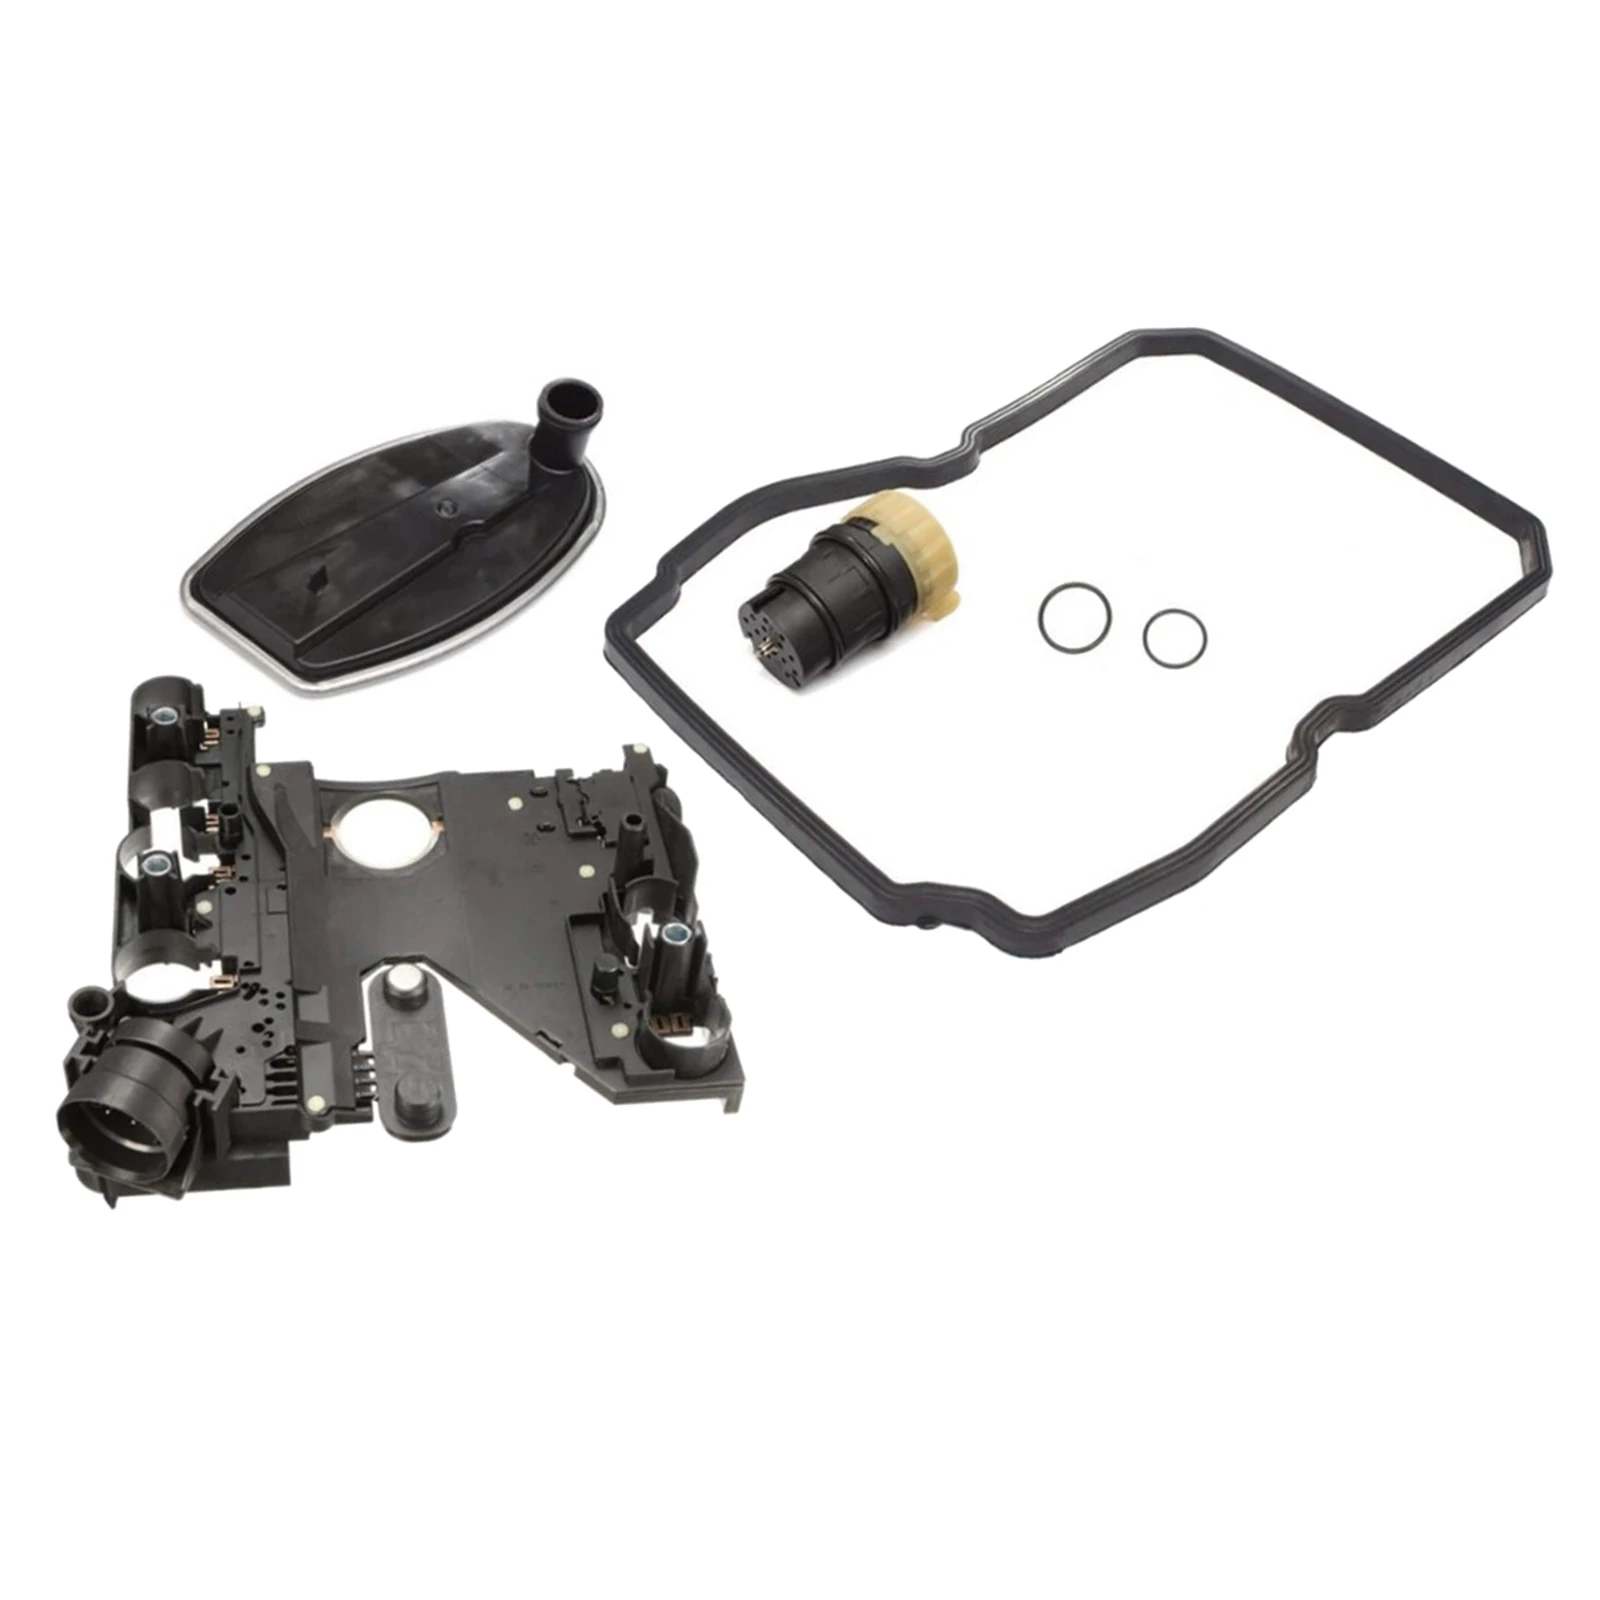 Gearbox 722.6 Transmission Conductor Plate + 13-Pin Connector Adapter Plug + Filter + 2 O-rings for Mercedes Benz